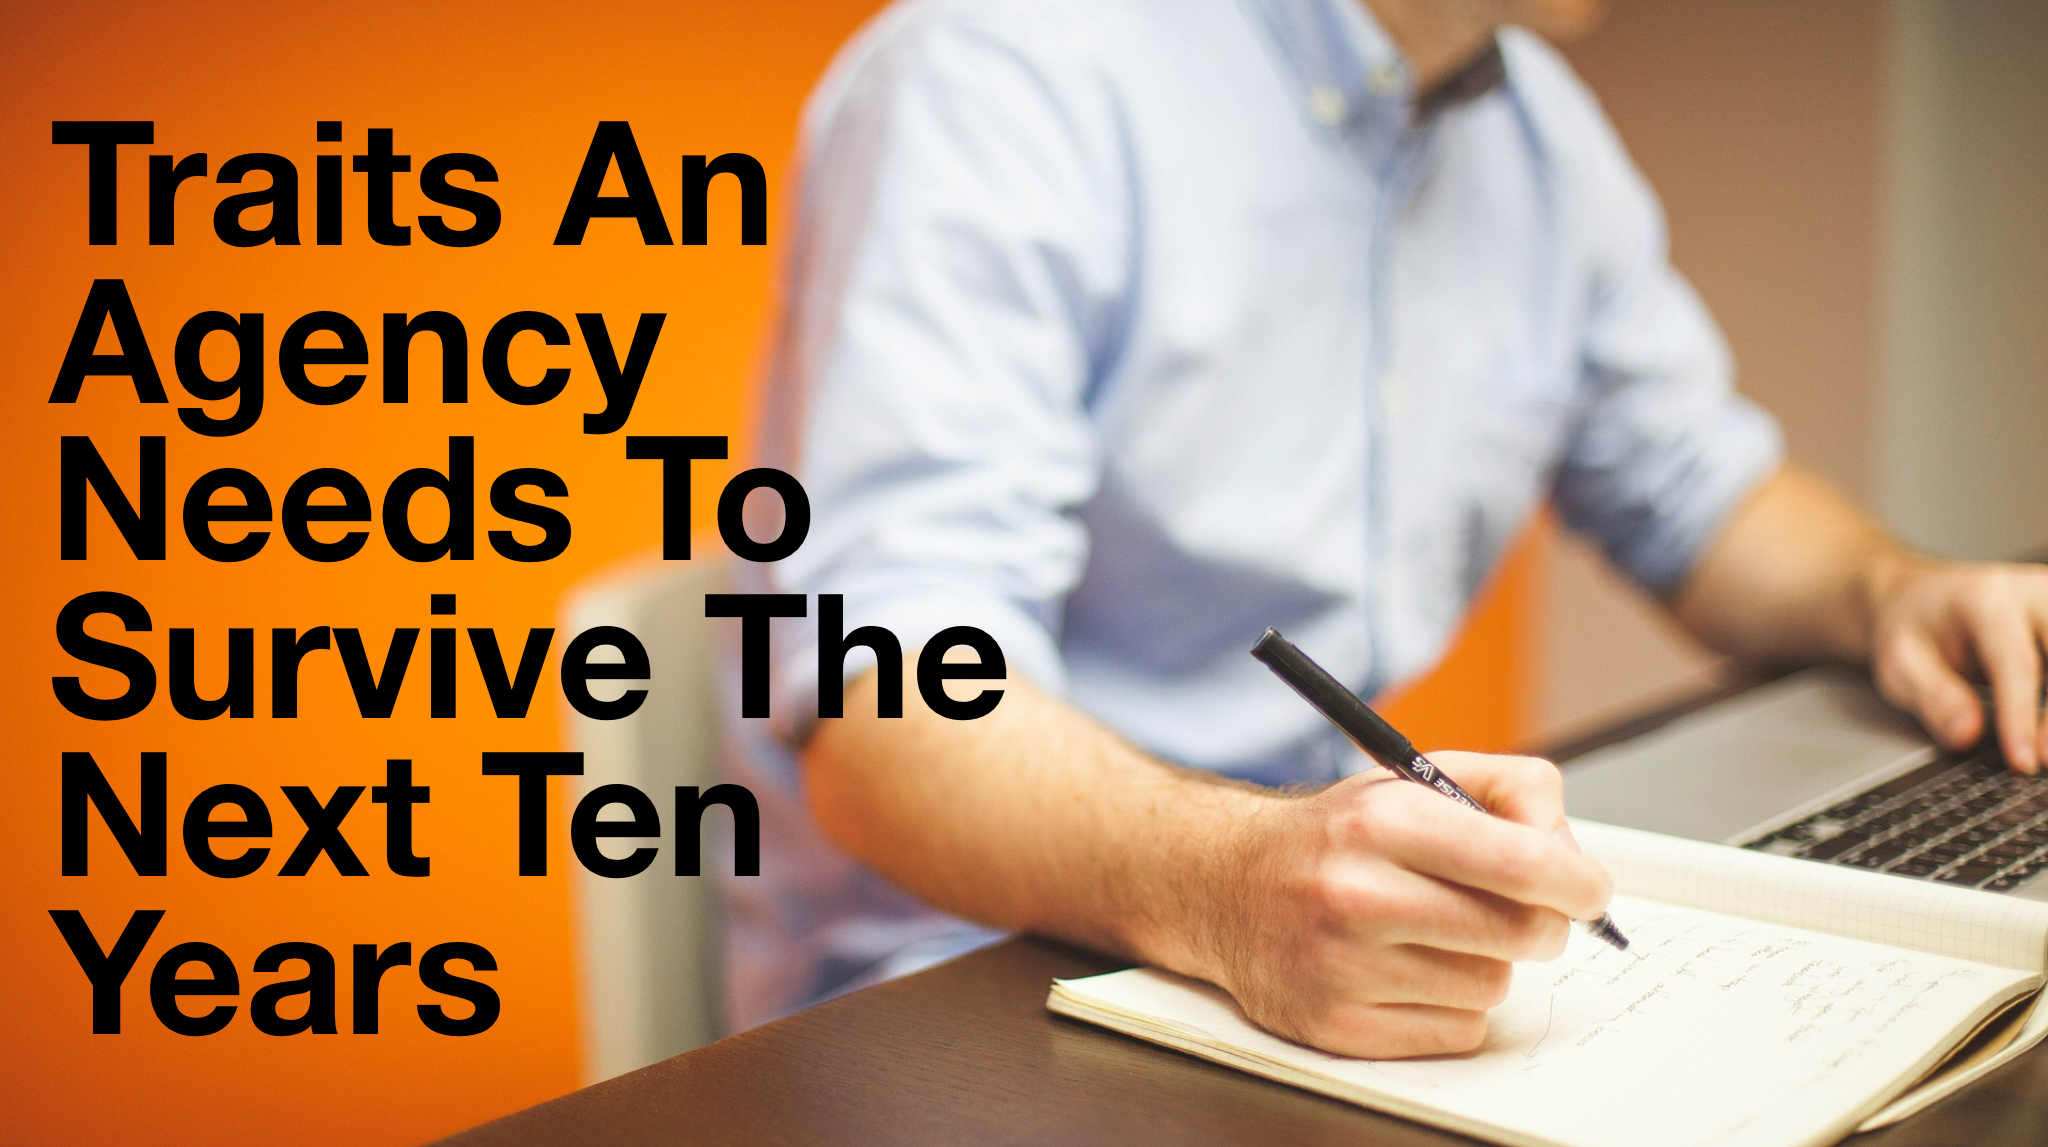 Traits an Agency Needs to Survive the Next Ten Years.